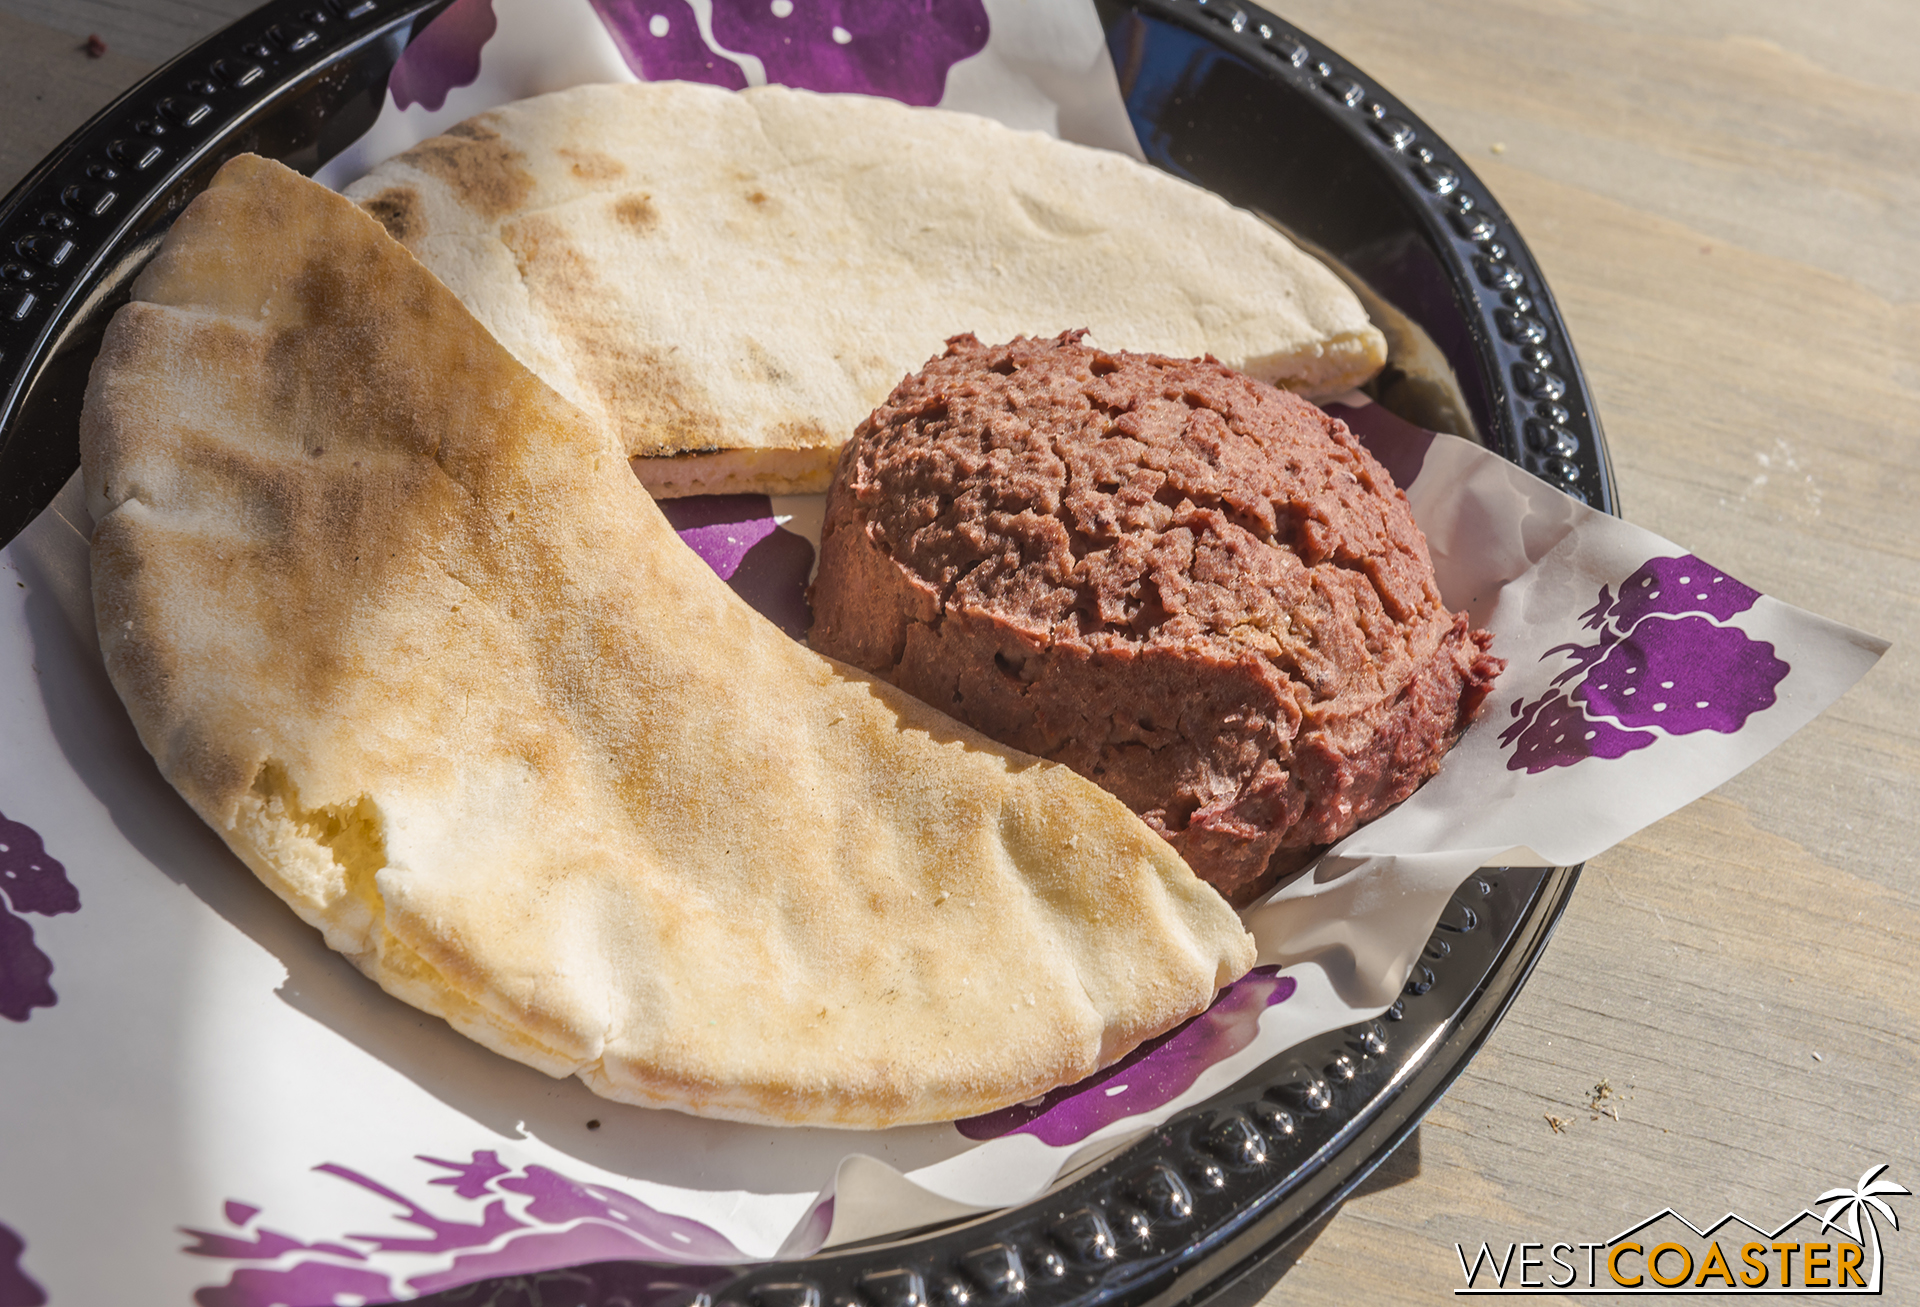  The Boysenberry Hummus with Grilled Pita was absolutely unremarkable.&nbsp; Not worth getting; save your tab for a second helping of one of the other items. 